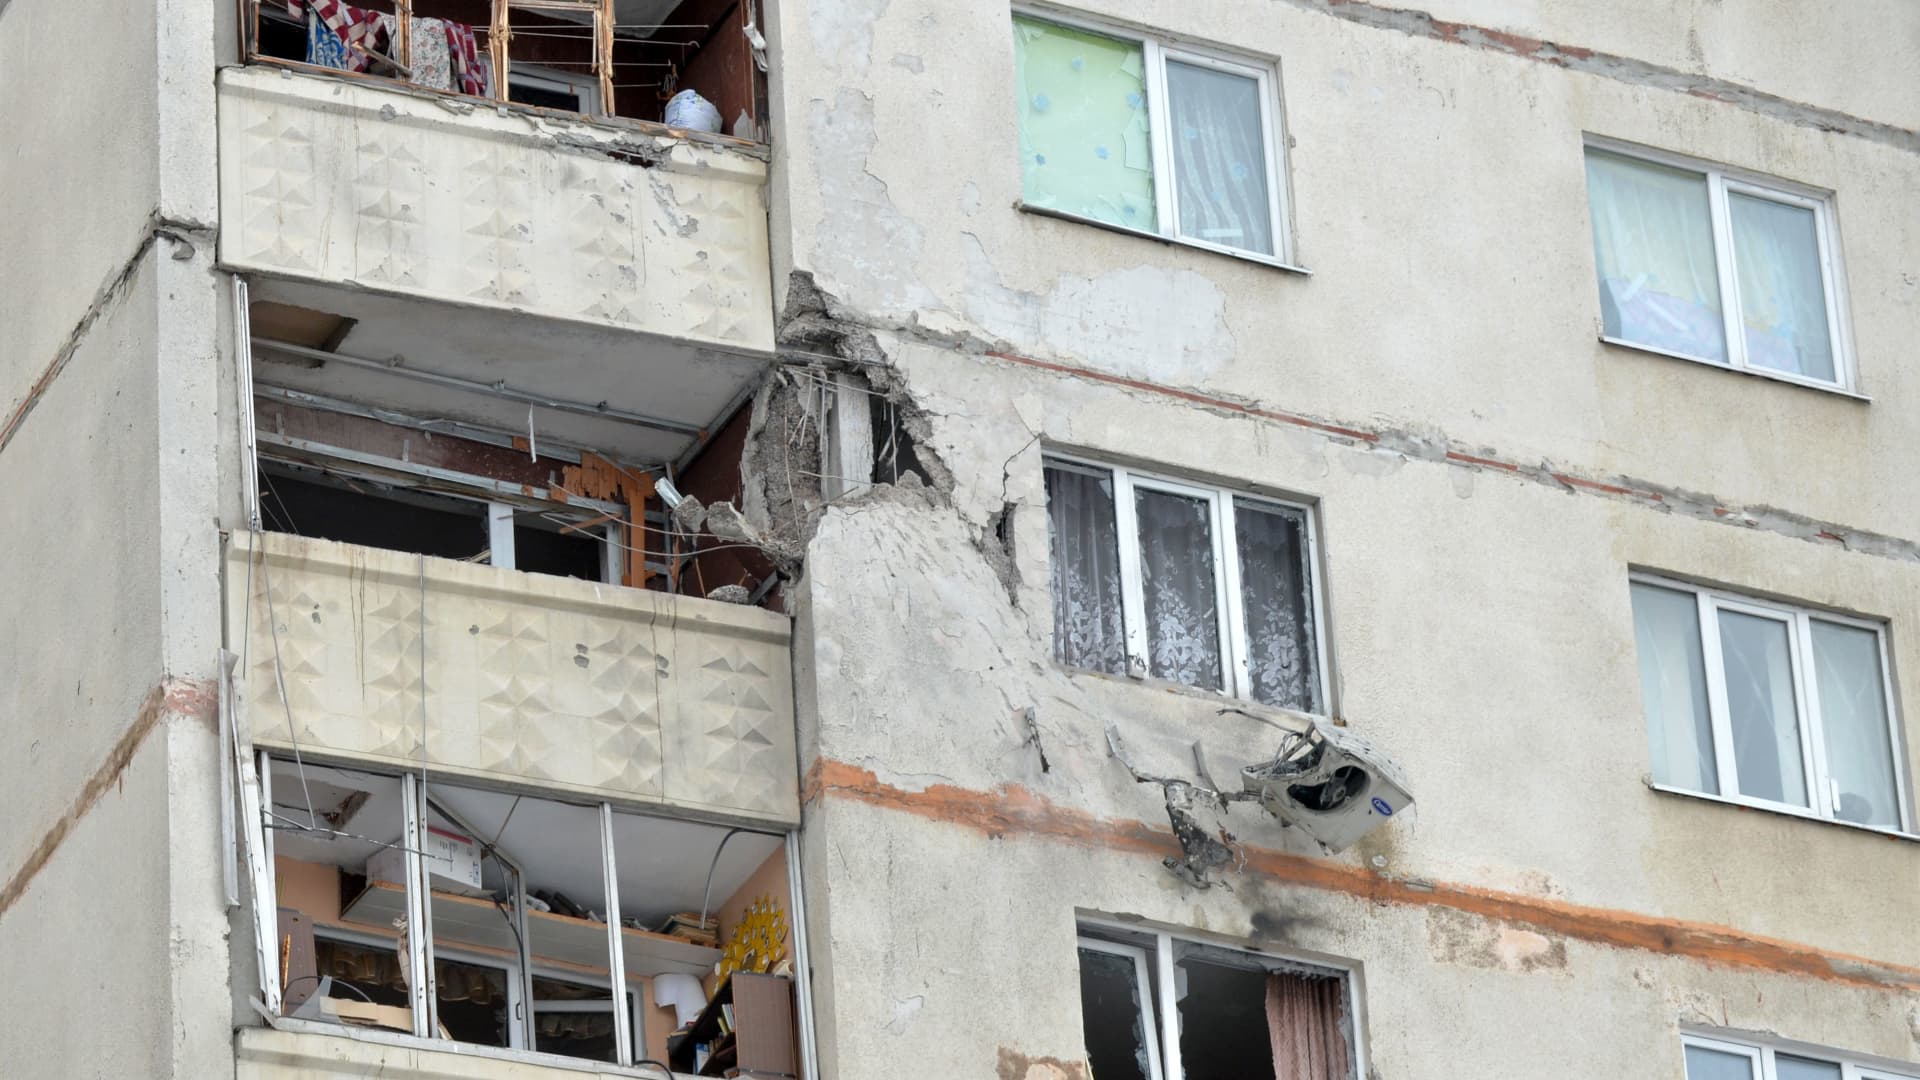 A view of a residential building damaged by recent shelling in Kharkiv on February 26, 2022.